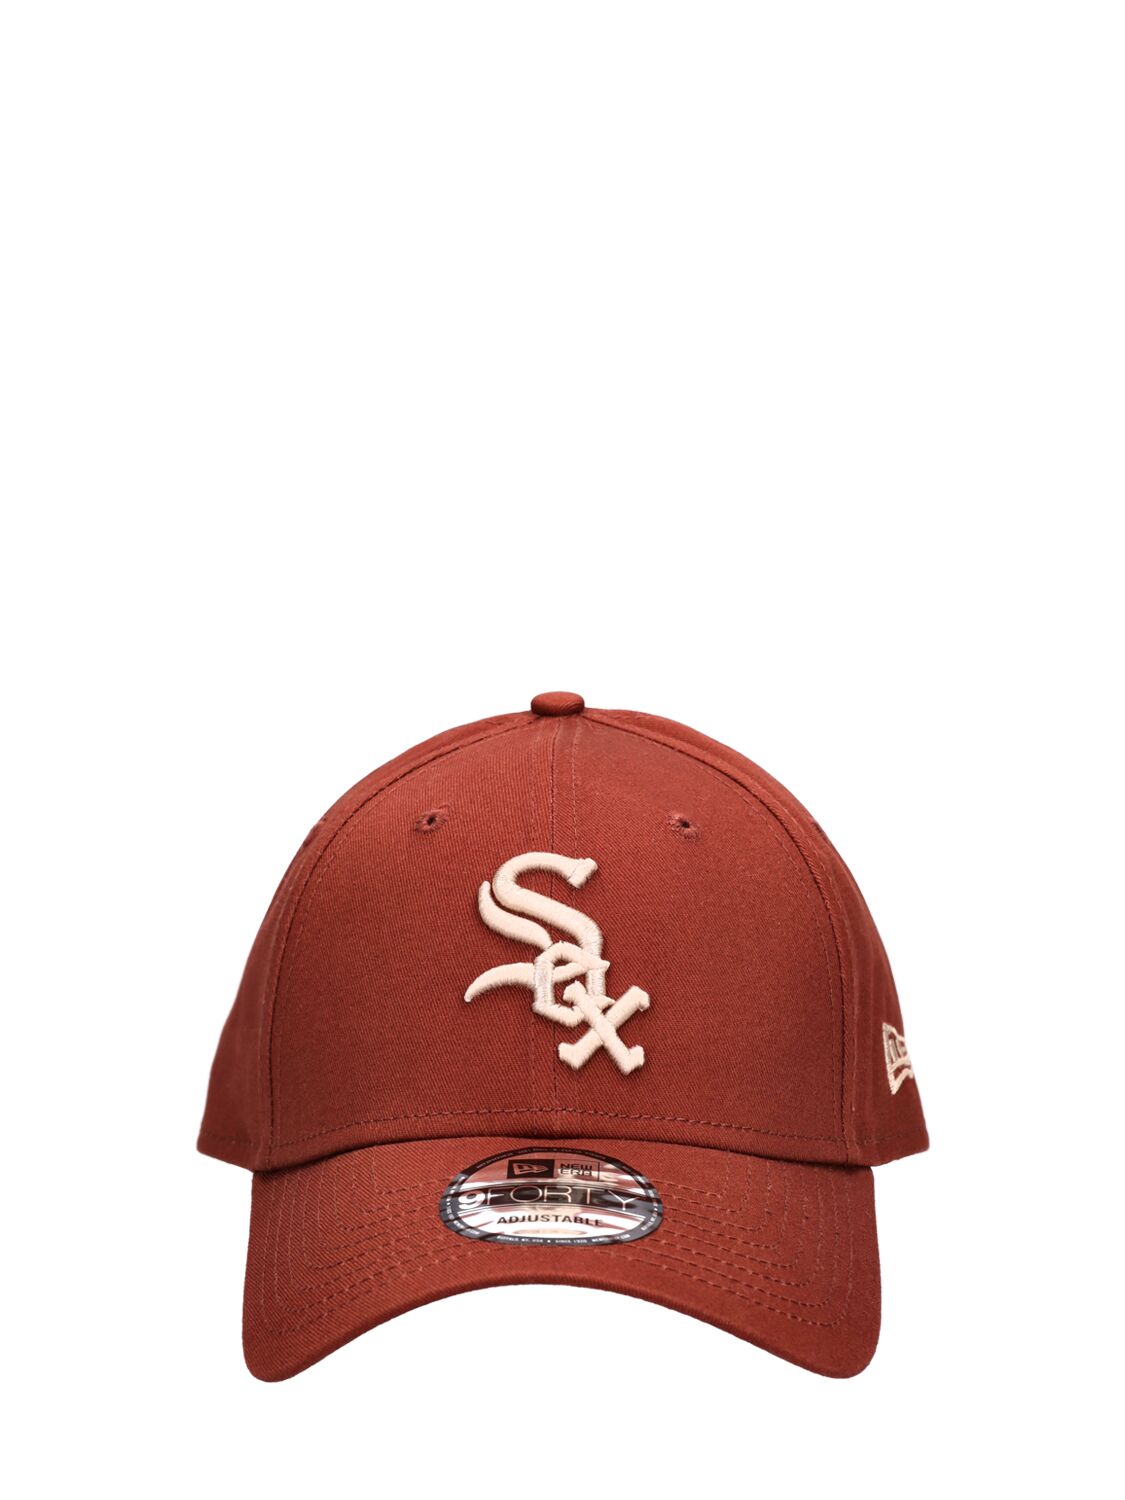 New Era 9forty League Chicago White Sox Hat In Brown,beige